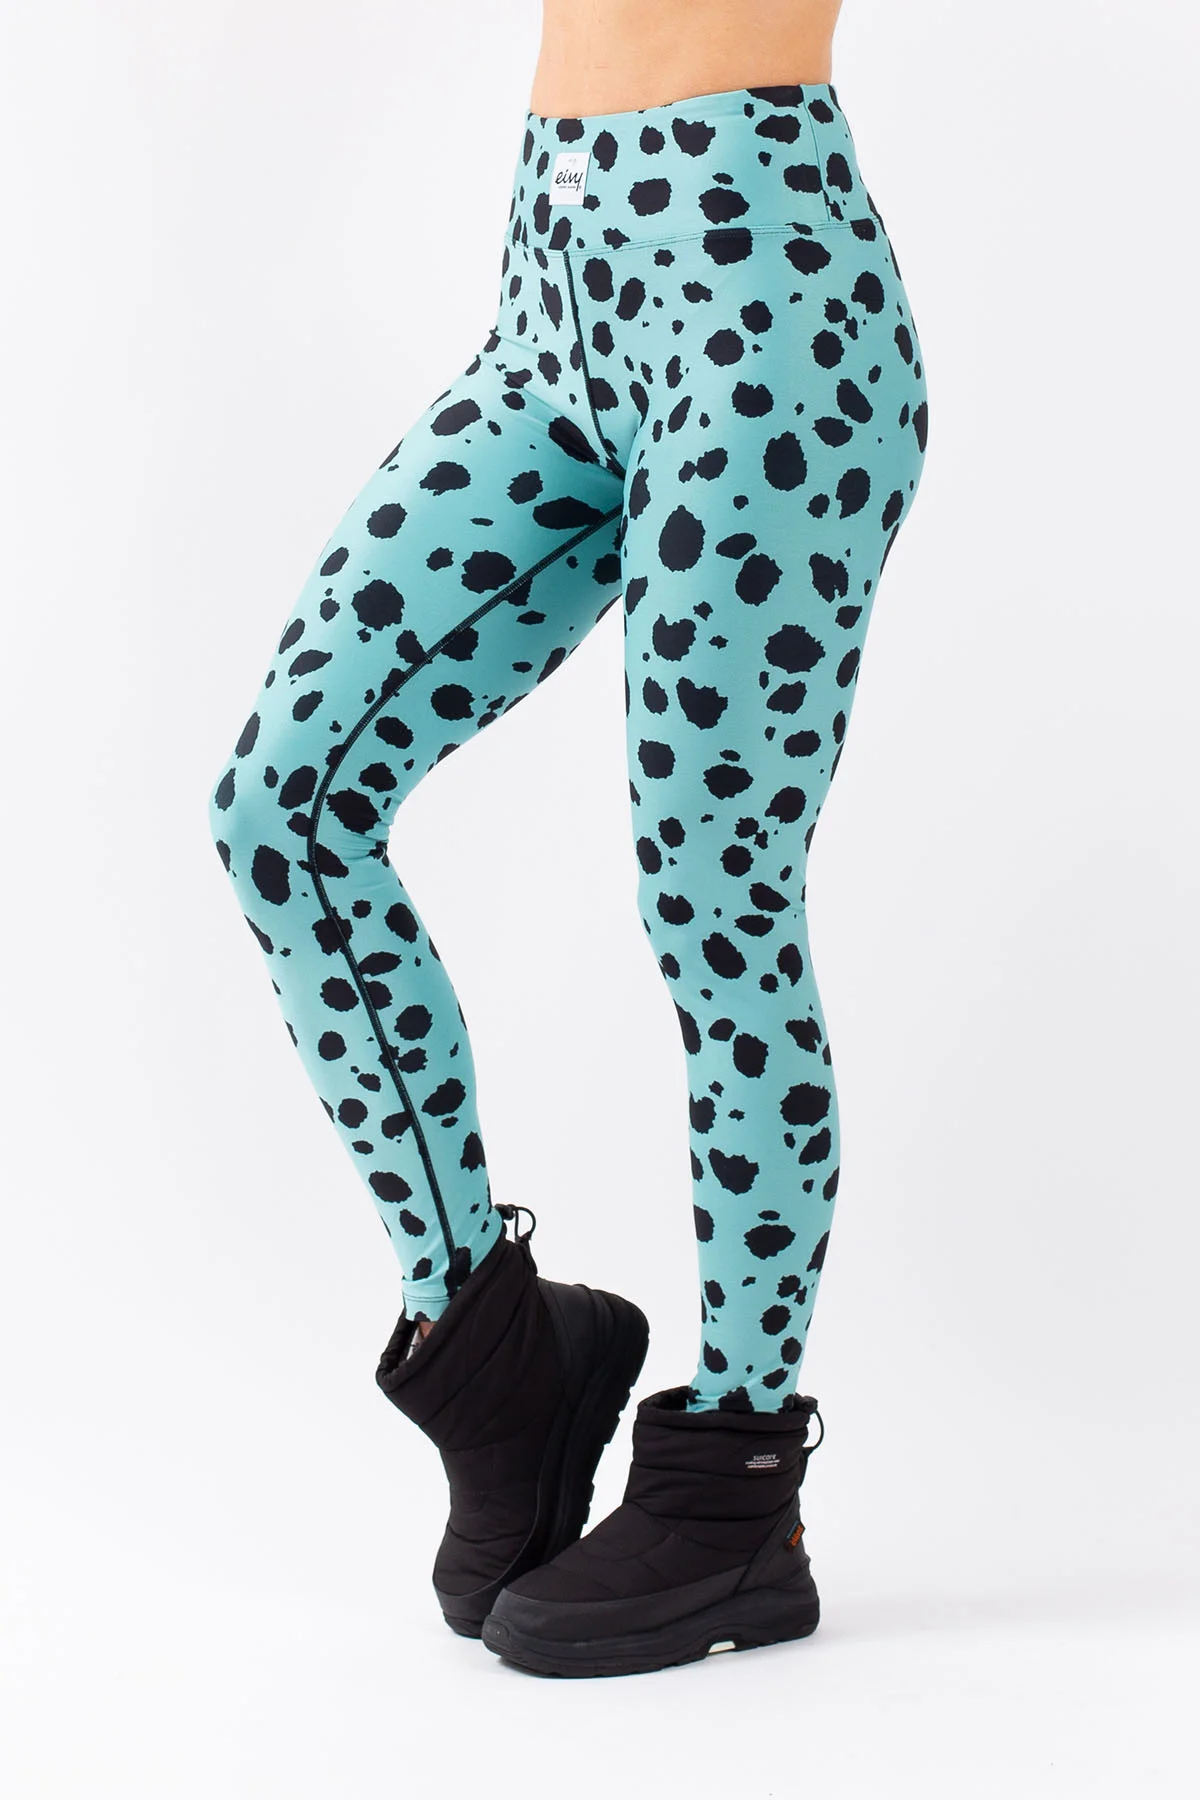 https://www.eivy.co/image/7037/base-layer-icecold-tights-turquoise-cheetah-front-1.webp